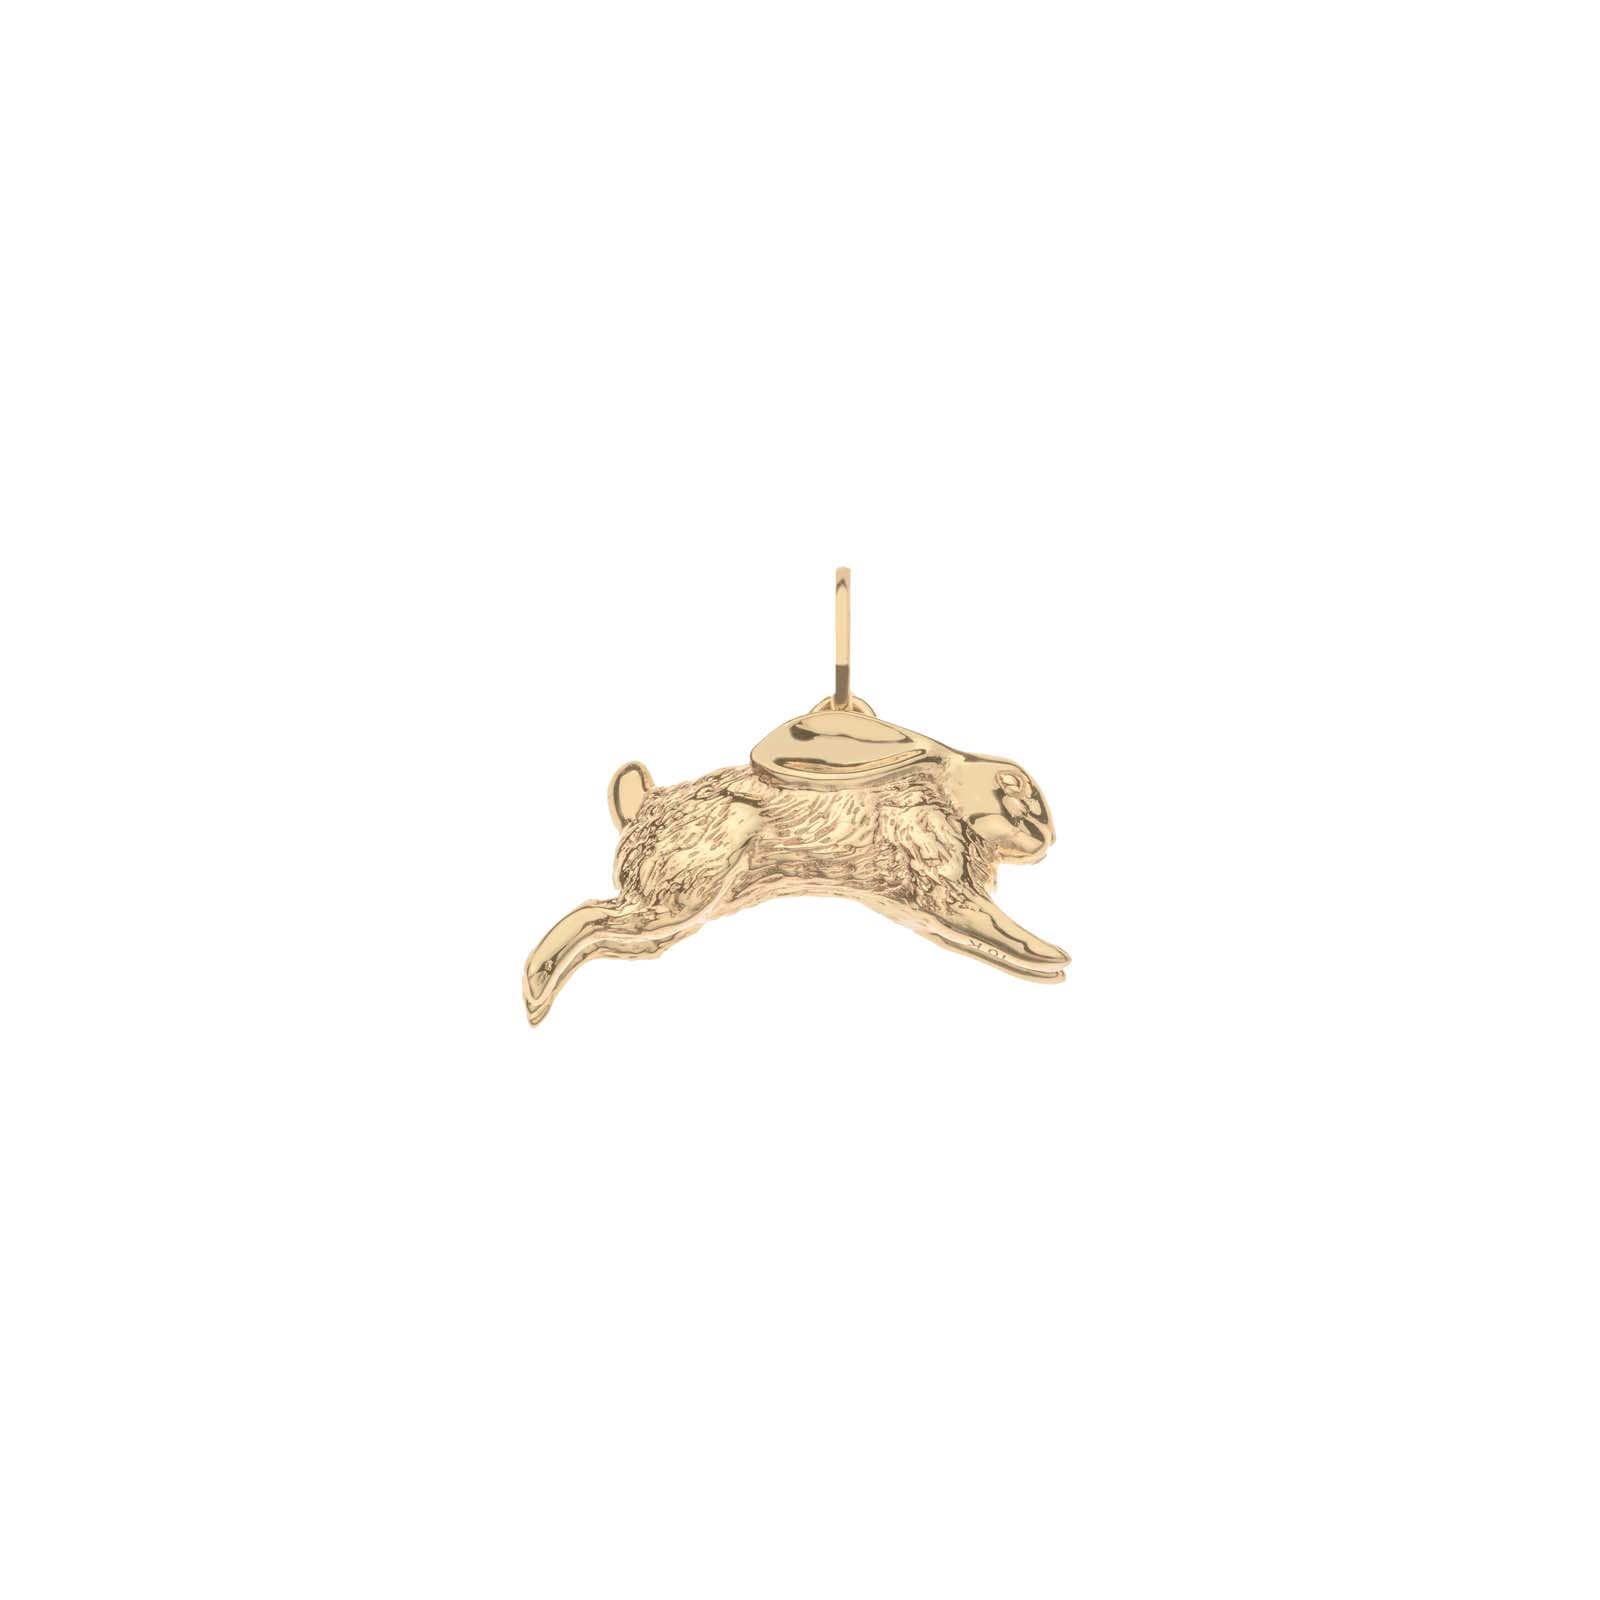 LUCKY Rabbit Charm in Solid Gold